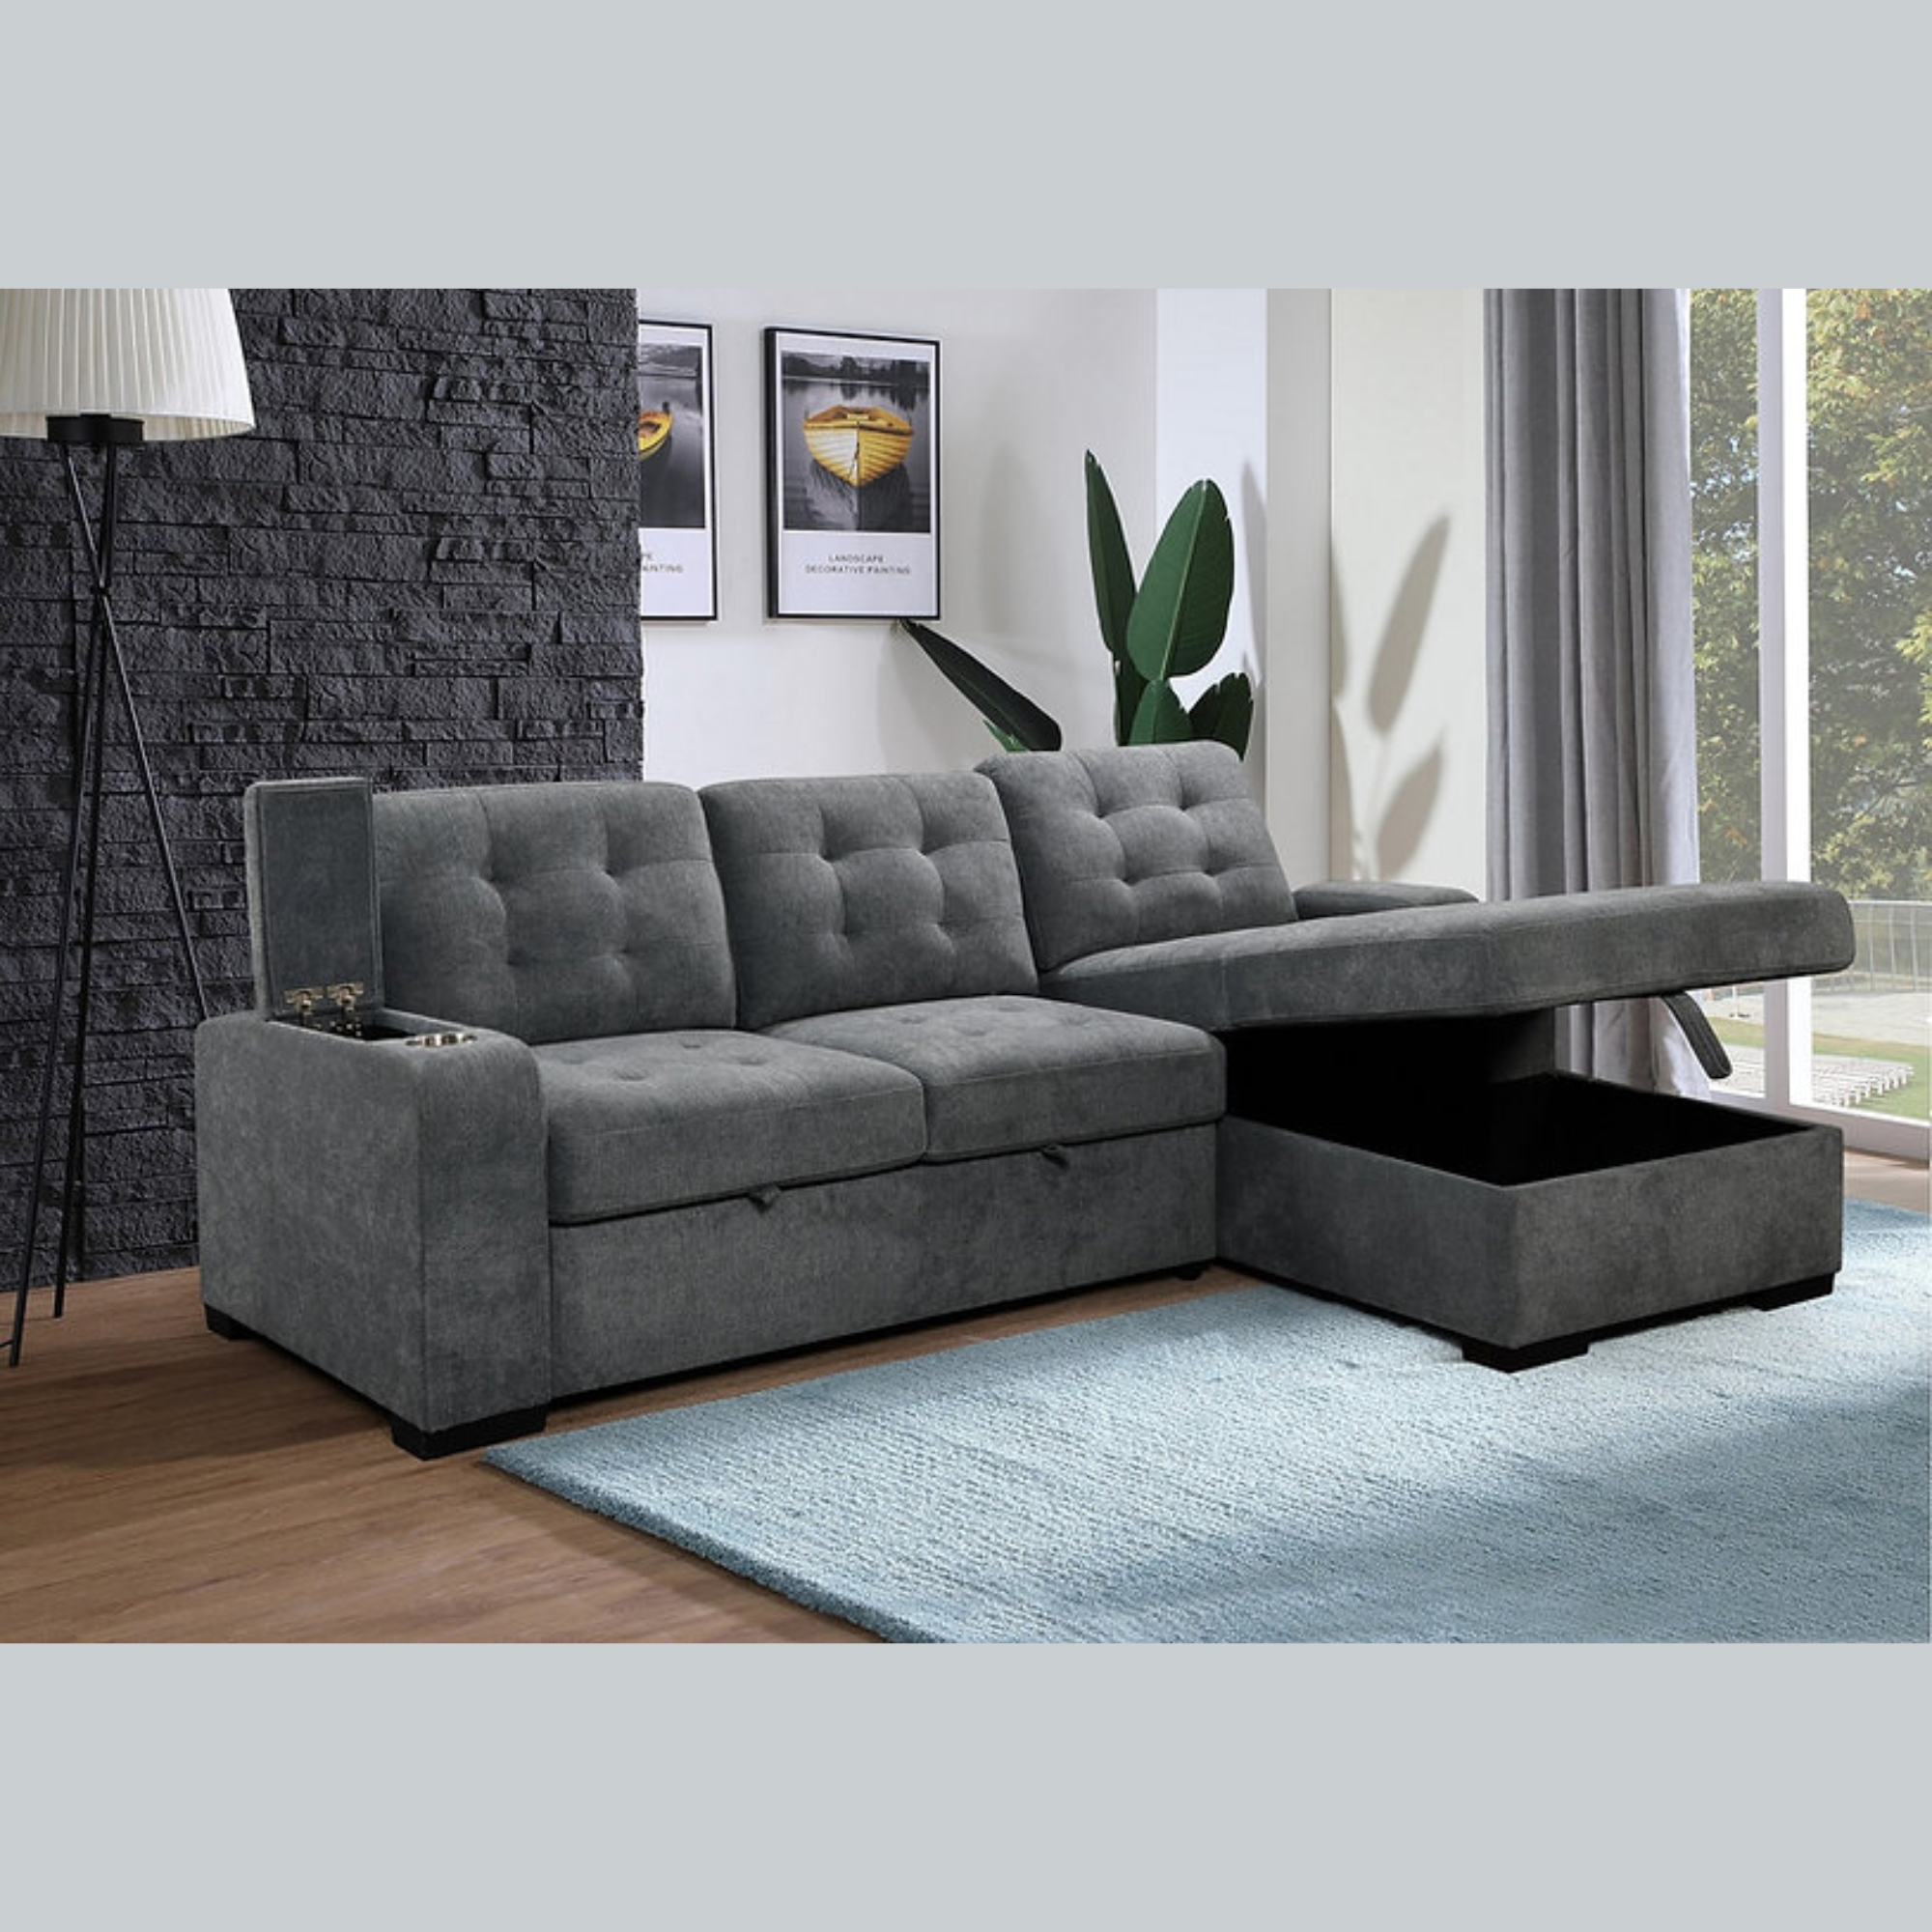 IF-9051 RHF Sofa Bed Sectional